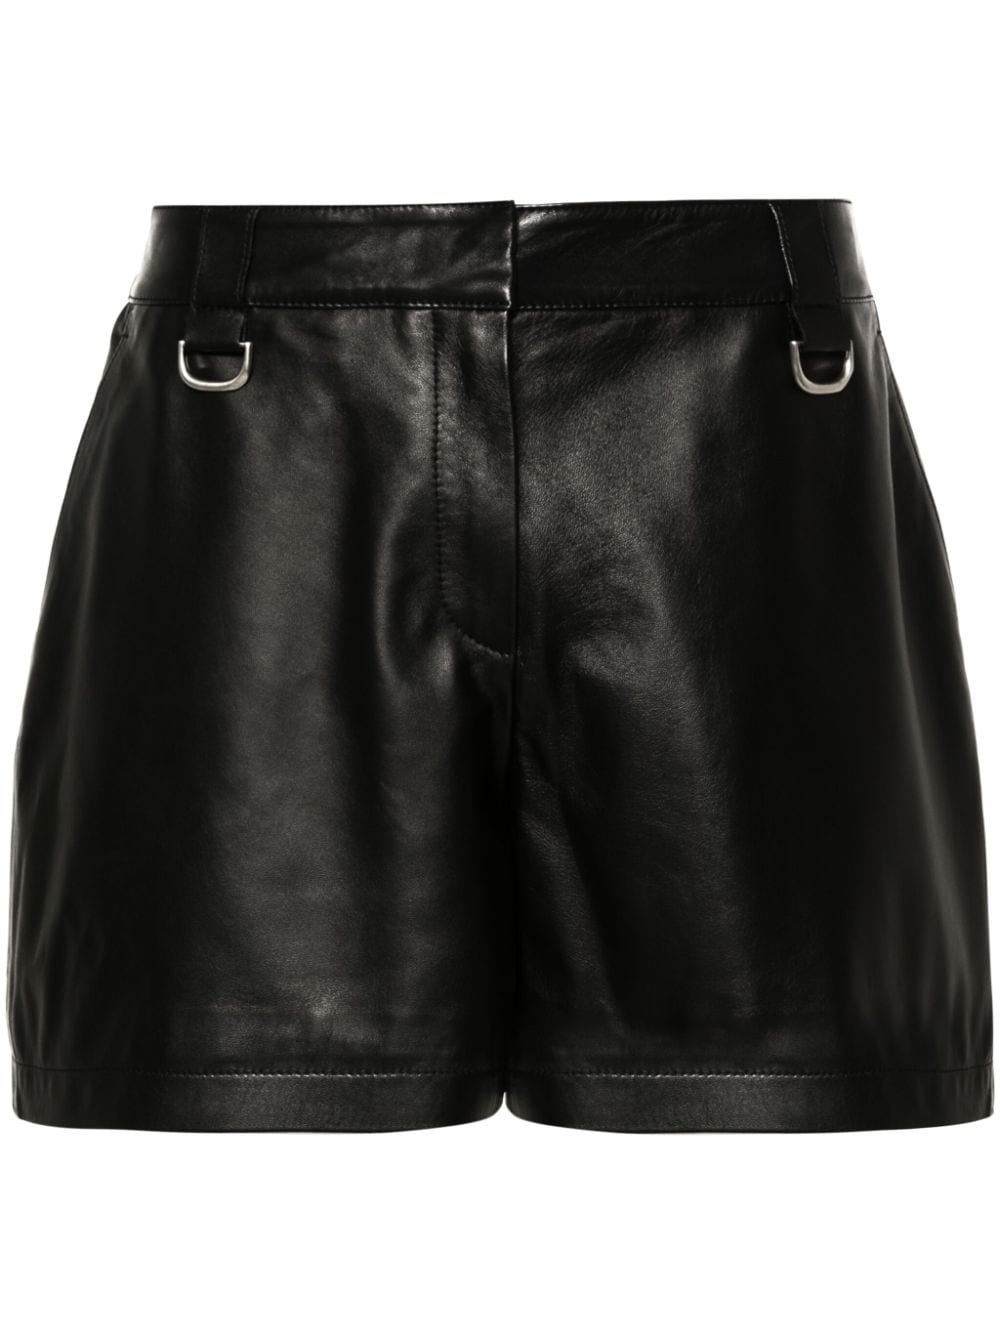 Off-White high-waisted leather shorts - Black von Off-White